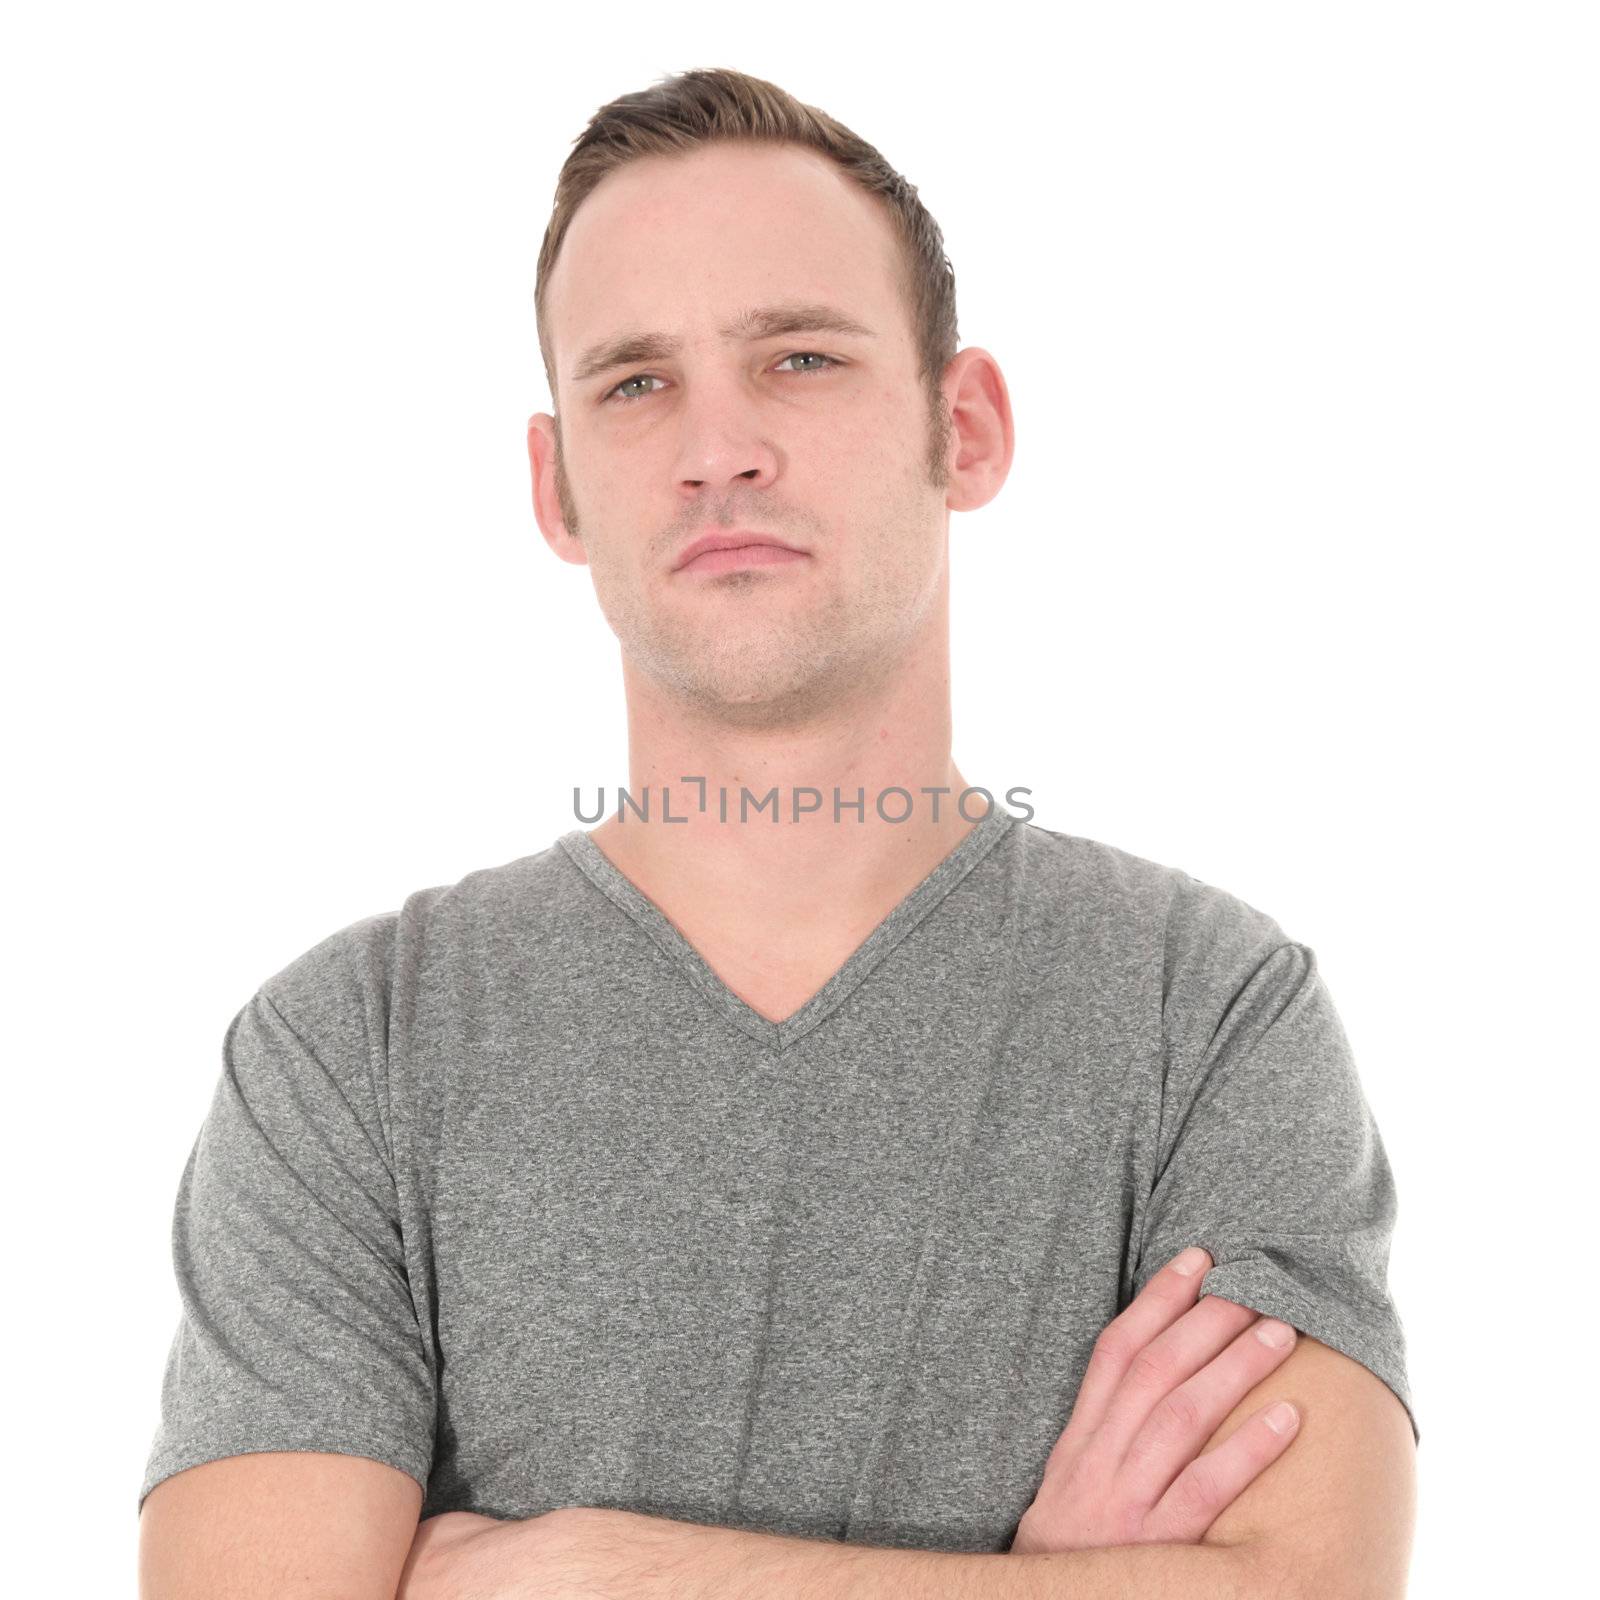 Pensive man with a serious expression standing with his arms folded looking just to the left of camera isolated on white